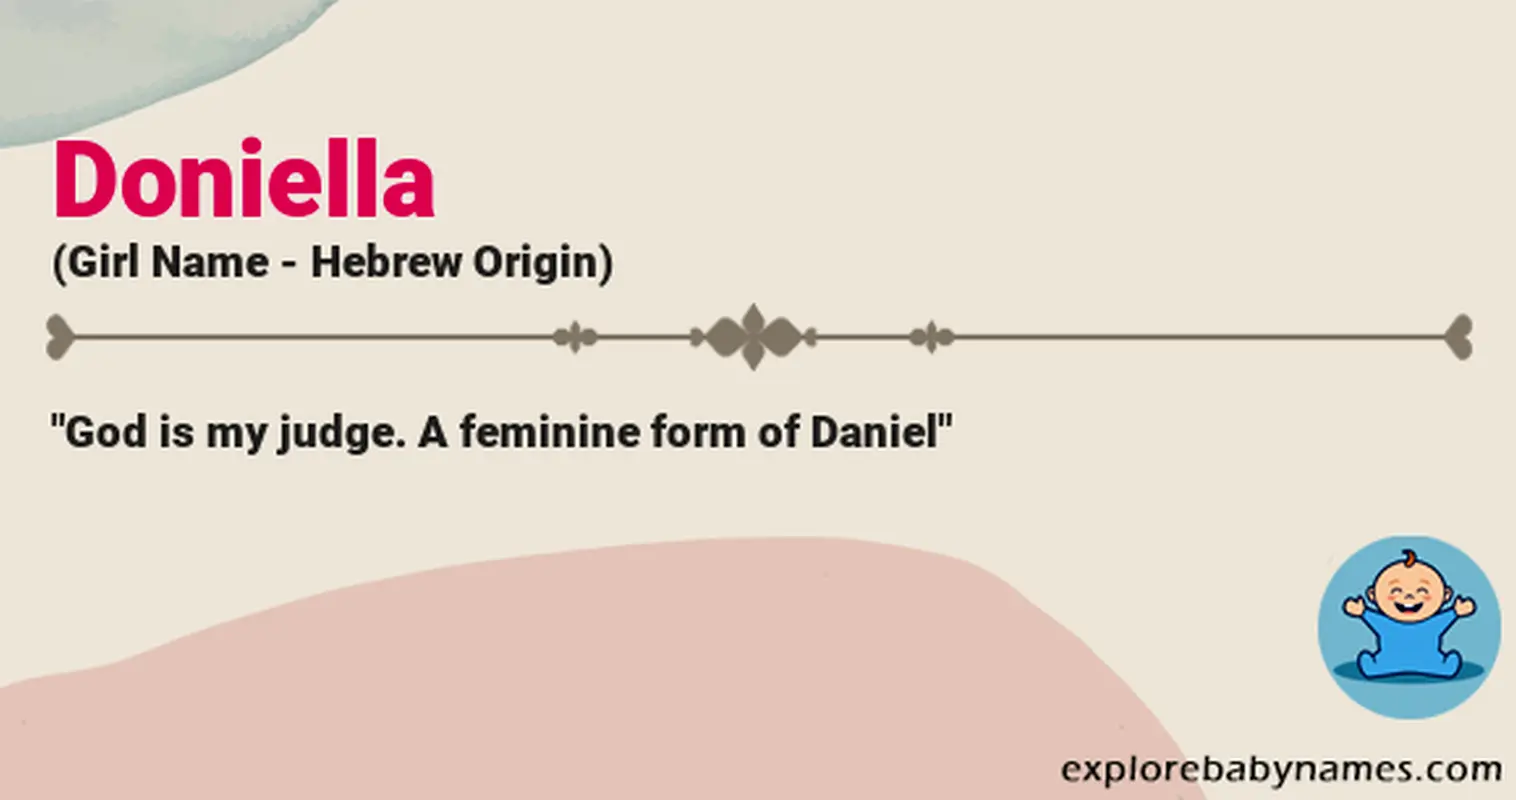 Meaning of Doniella